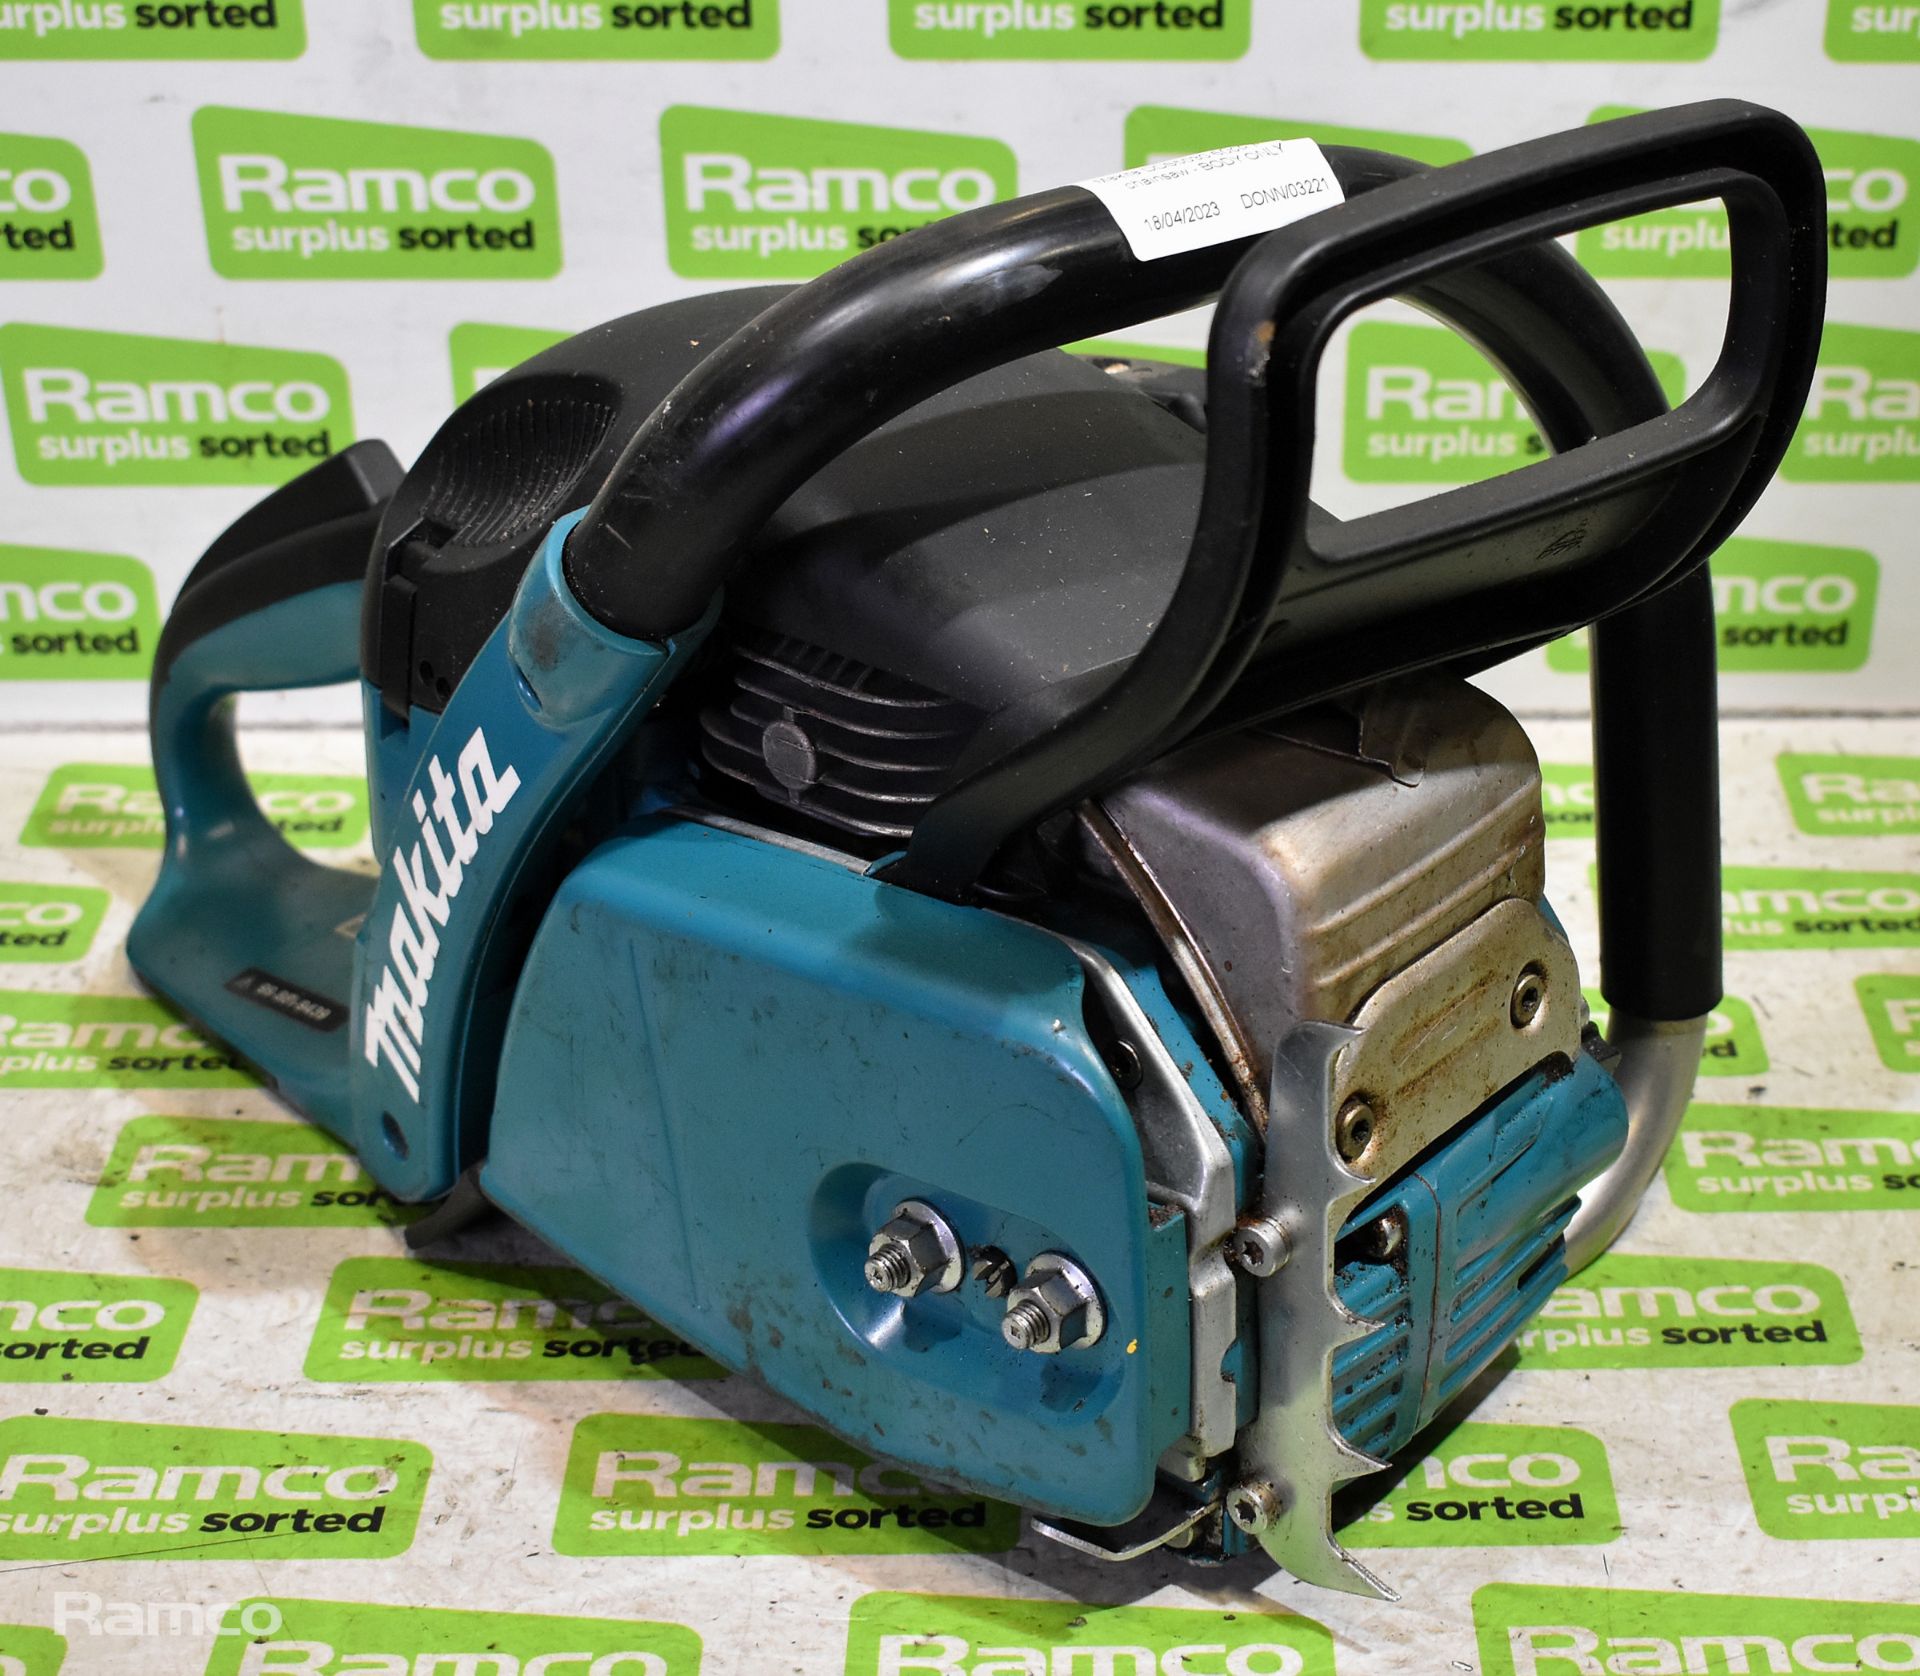 4x Makita DCS5030 50cc petrol chainsaws - BODIES ONLY - AS SPARES OR REPAIRS - Image 8 of 21